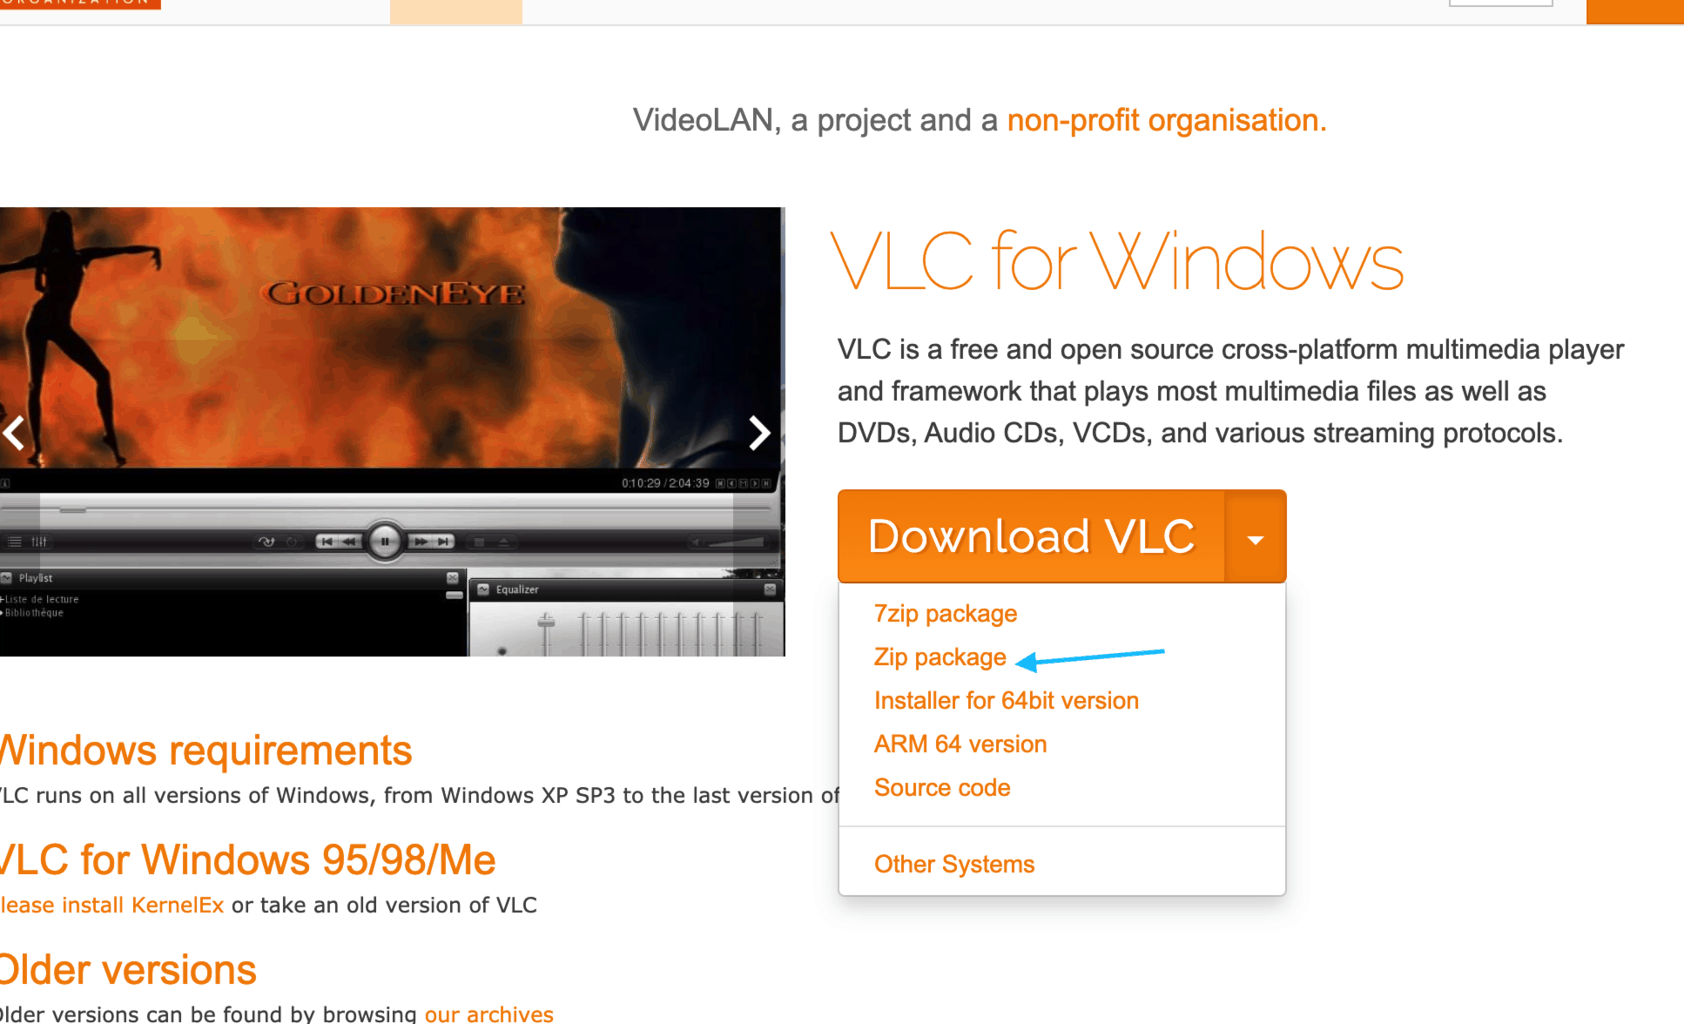 how do i get vlc media player to only play mono